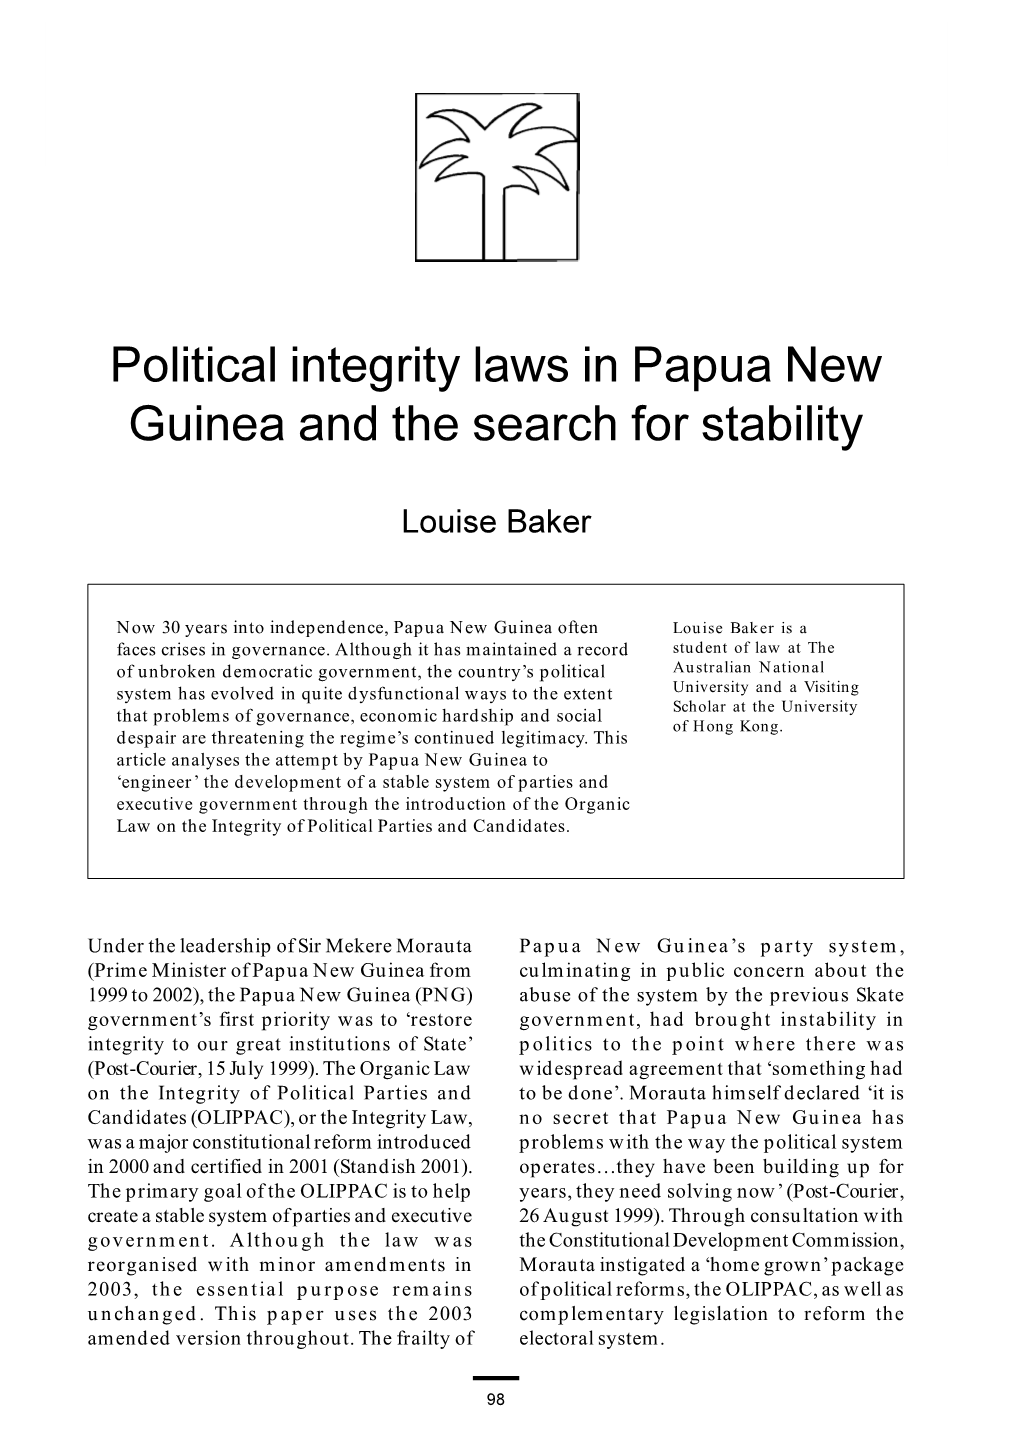 Political Integrity Laws in Papua New Guinea and the Search for Stability